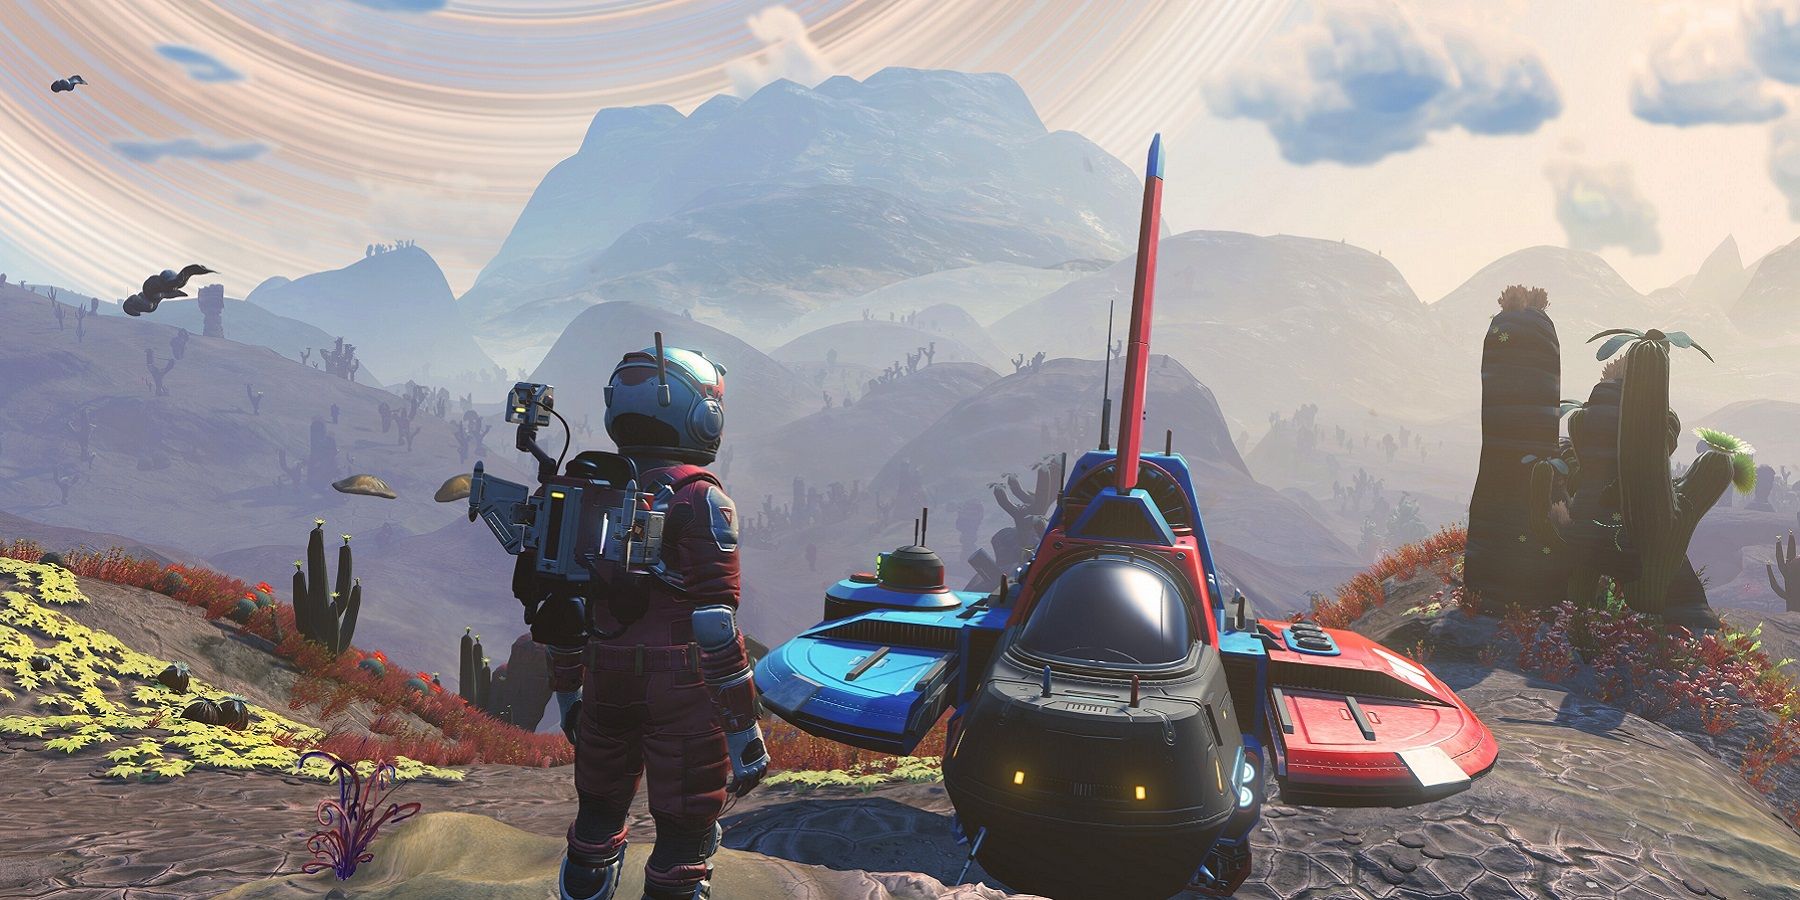 Image from No Man's Sky showing the Traveler by their ship.